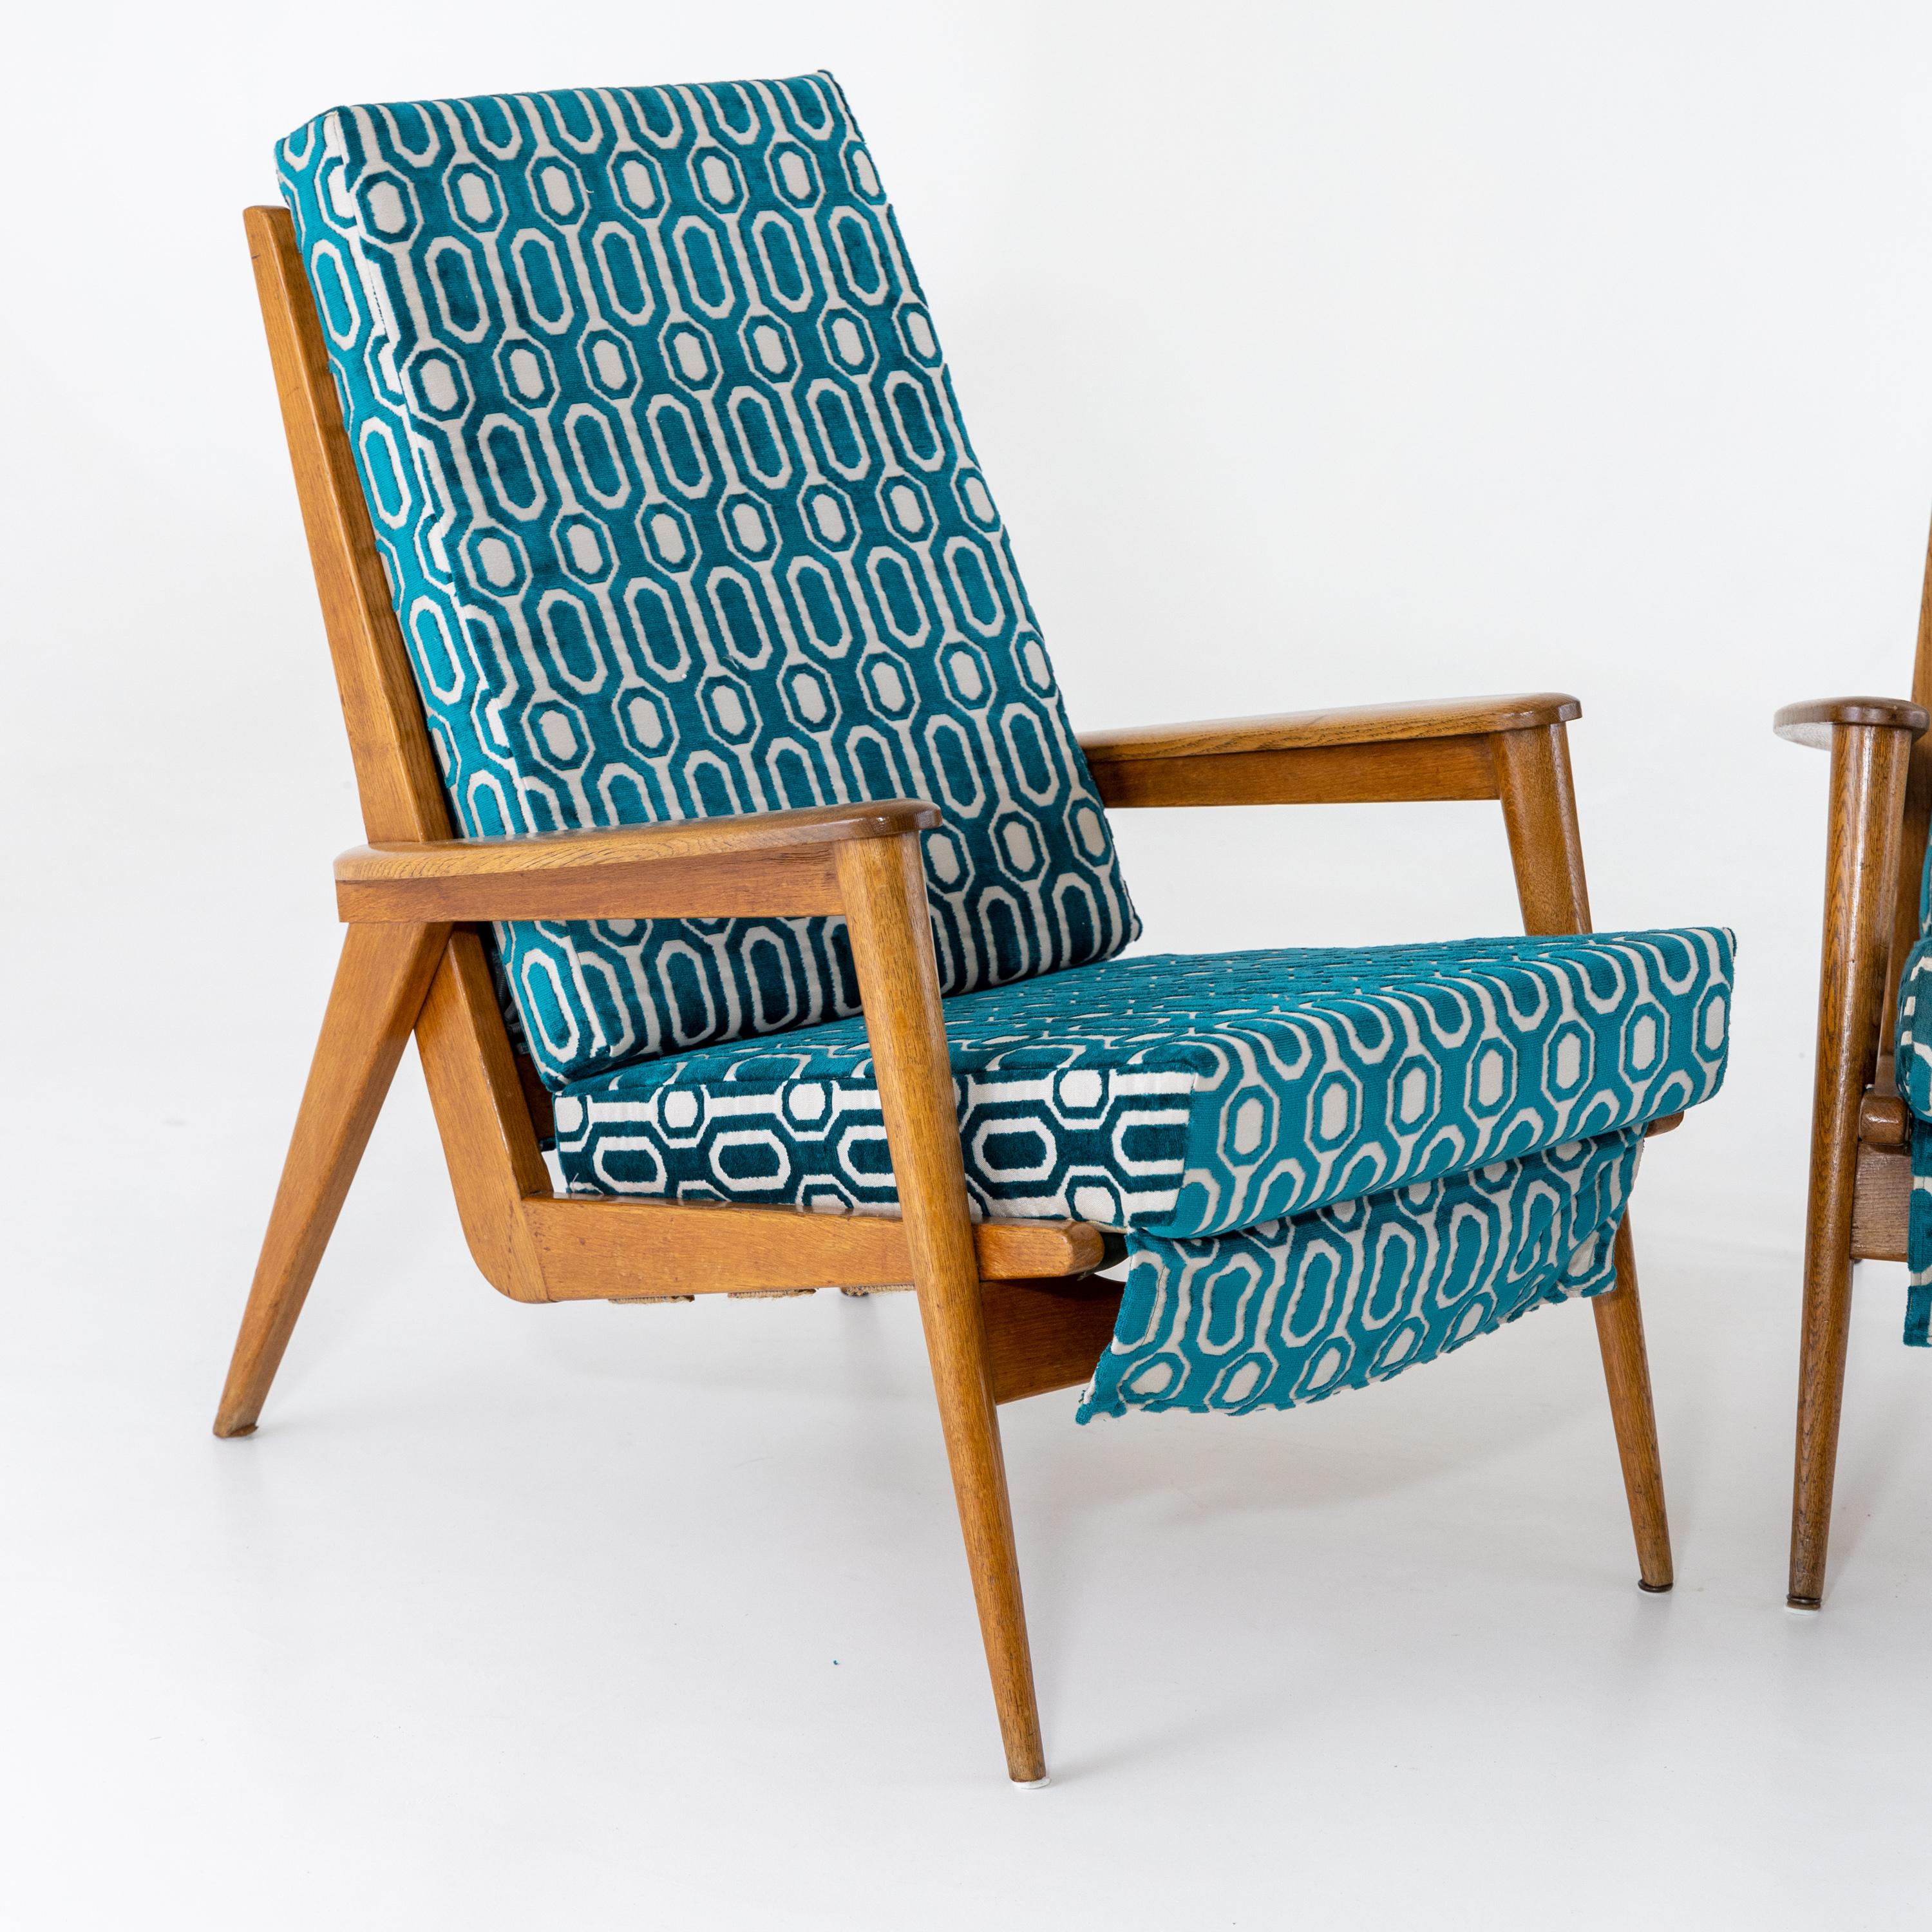 Pair of Italian armchairs on conical legs with upholstered seats and backs. The armchairs have been reupholstered in a blue and white fabric with a geometric pattern.